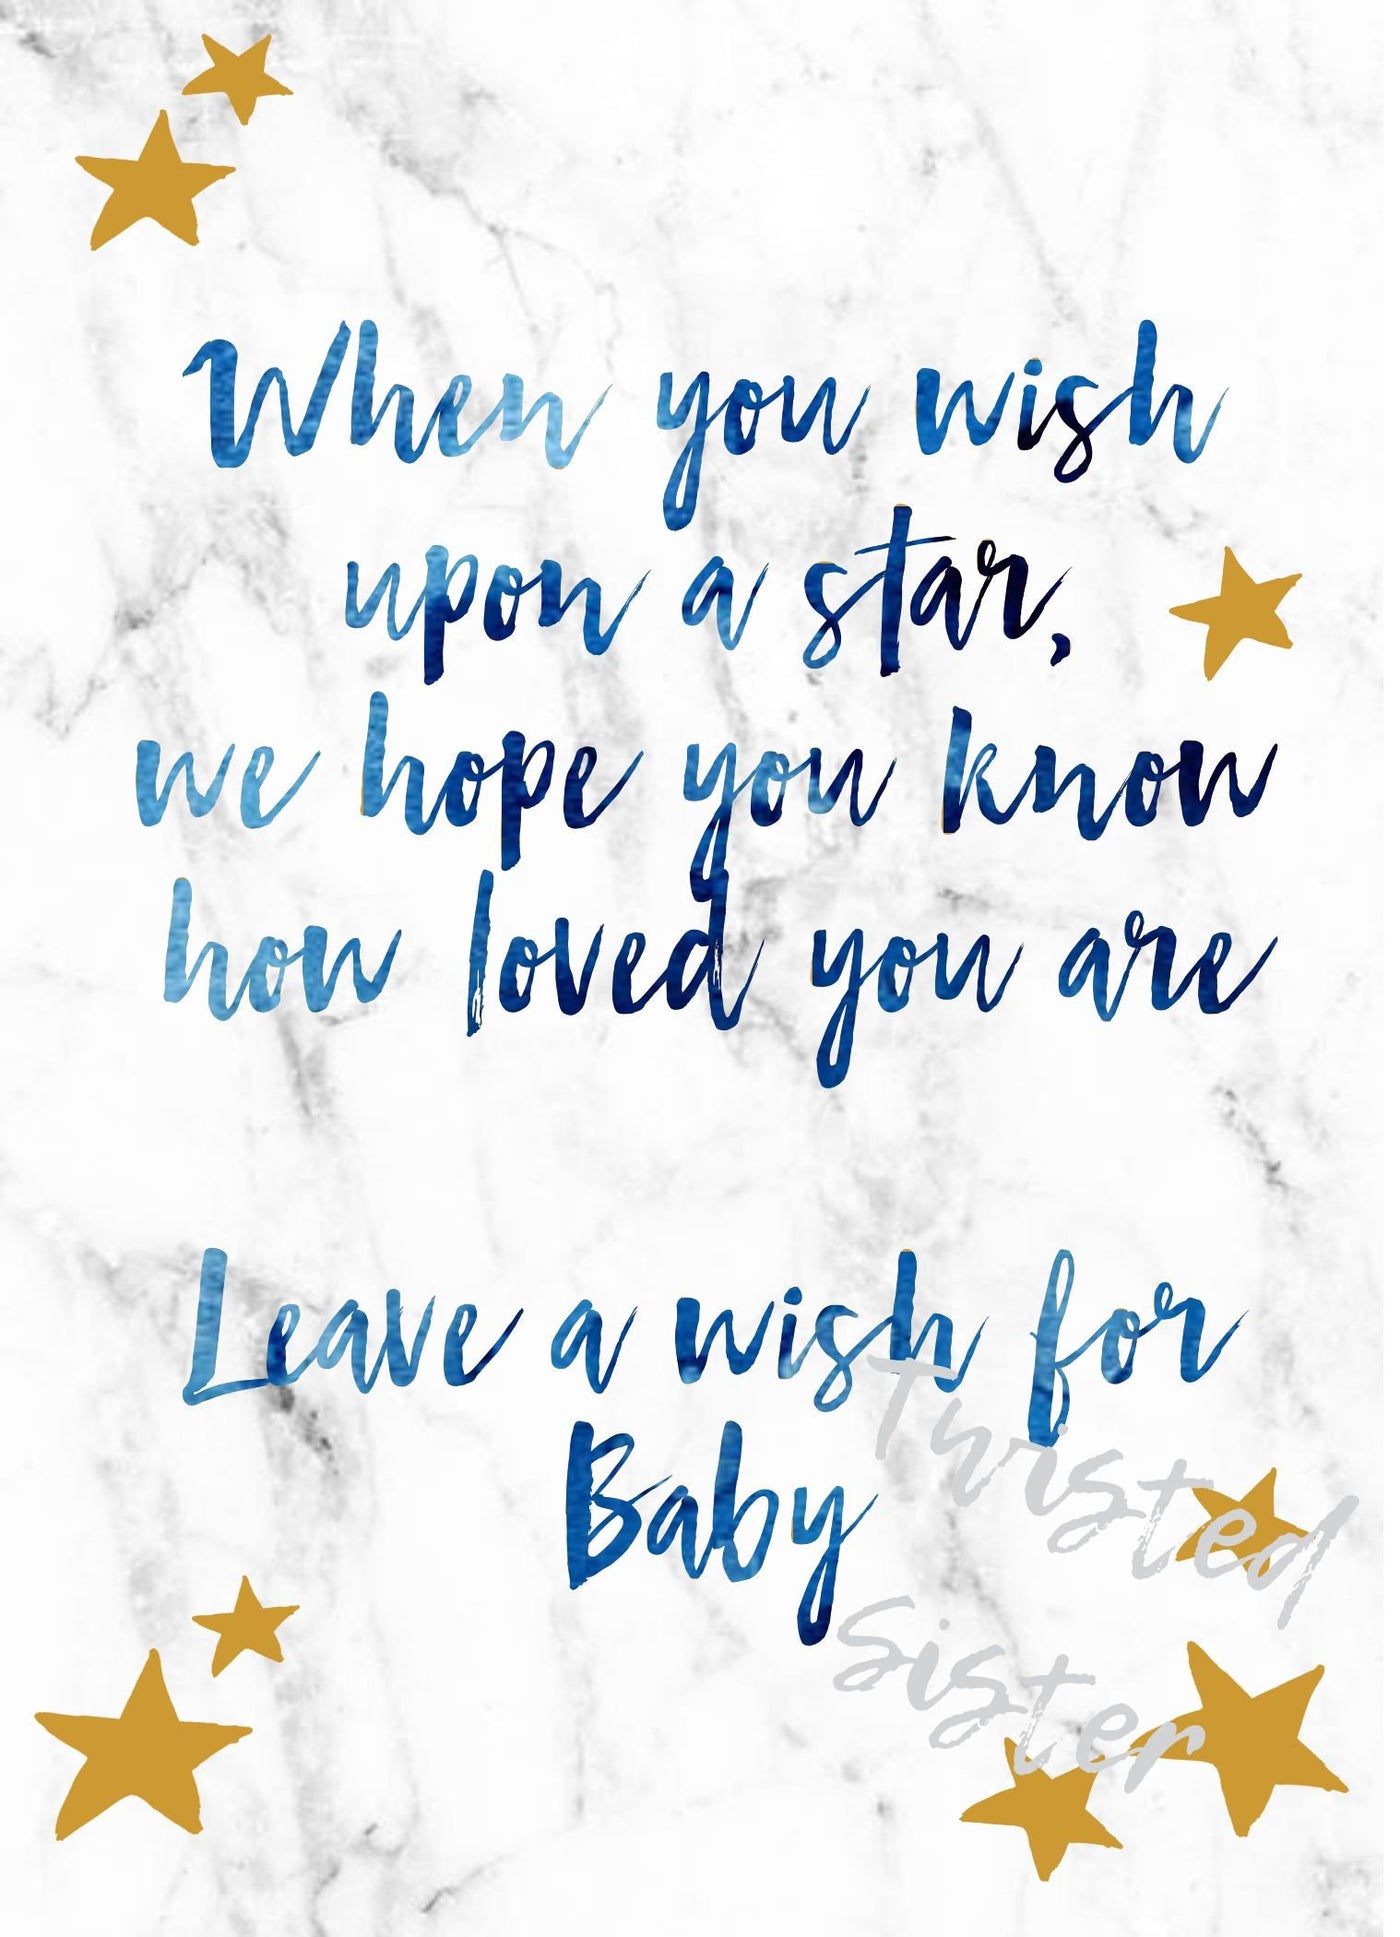 Baby Shower Wishes for Baby, Baby Shower Wishing Well, Baby Shower Wishes, Baby Shower Wish Cards, Wish Tree, Over the Moon, Twinkle Twinkle